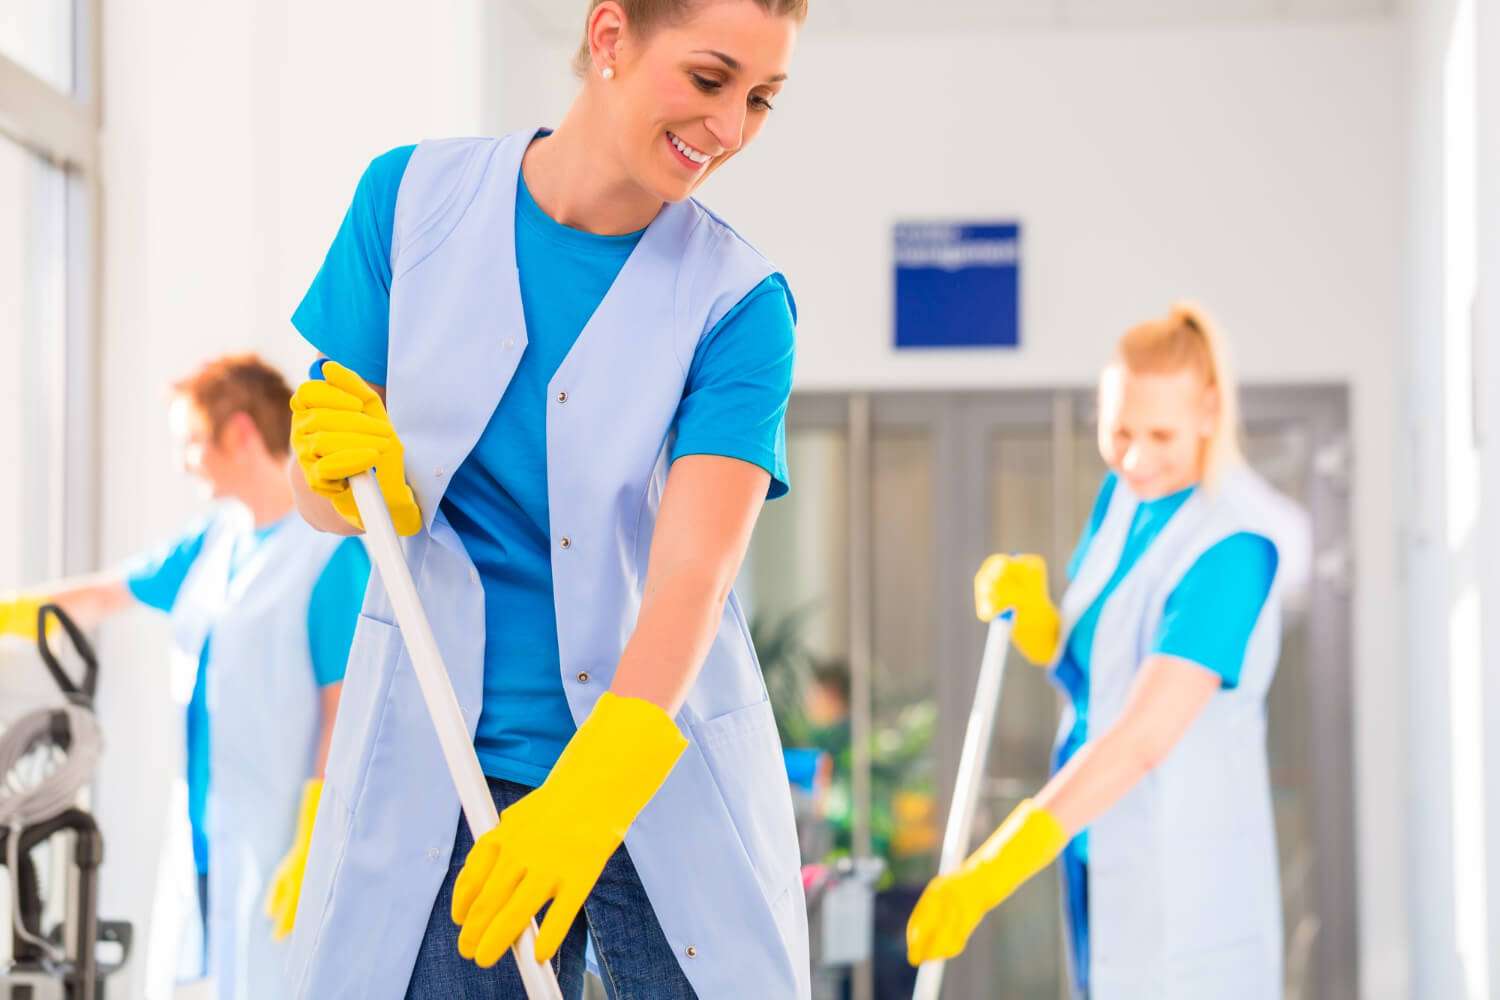 Maid Services for your Home